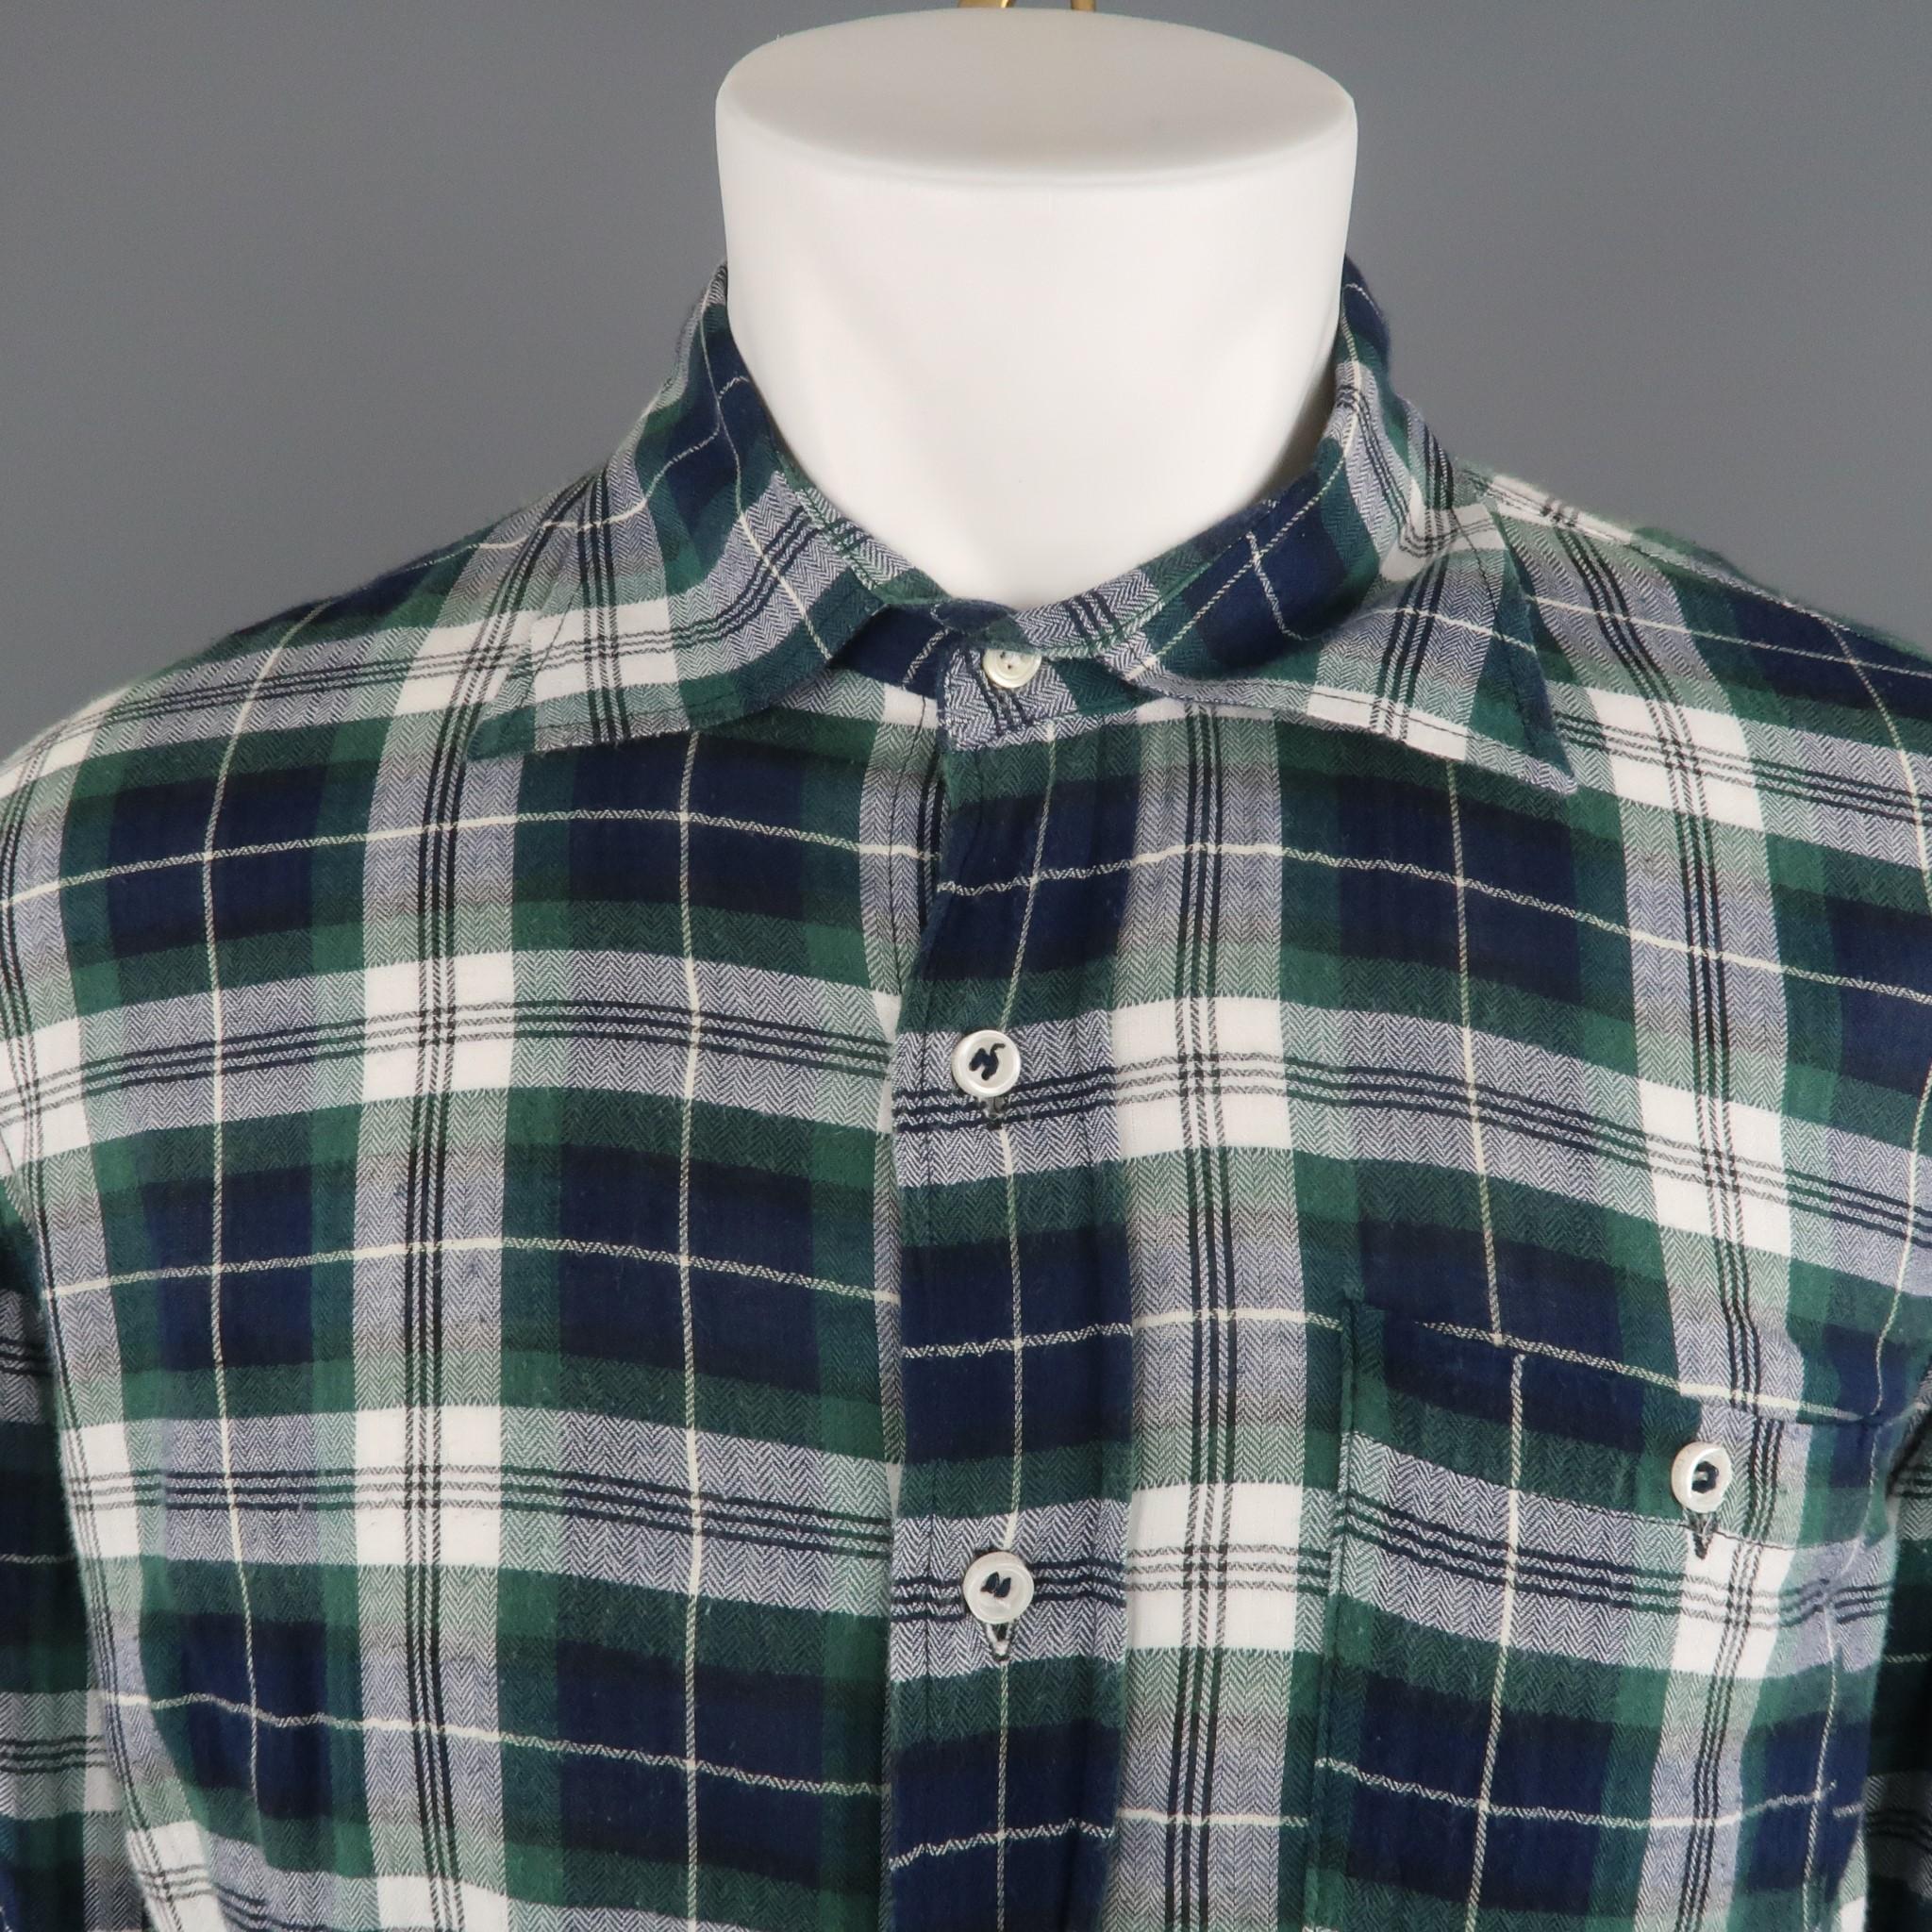 DSQUARED2 long sleeve shirt comes in a green and blue plaid featuring a spread collar and a front patch pocket.
 
Very Good Pre-Owned Condition.
Marked: IT 52
 
Measurements:
 
Shoulder: 19 in.
Chest: 46 in.
Sleeve: 27 in.
Length: 25 in.
SKU: